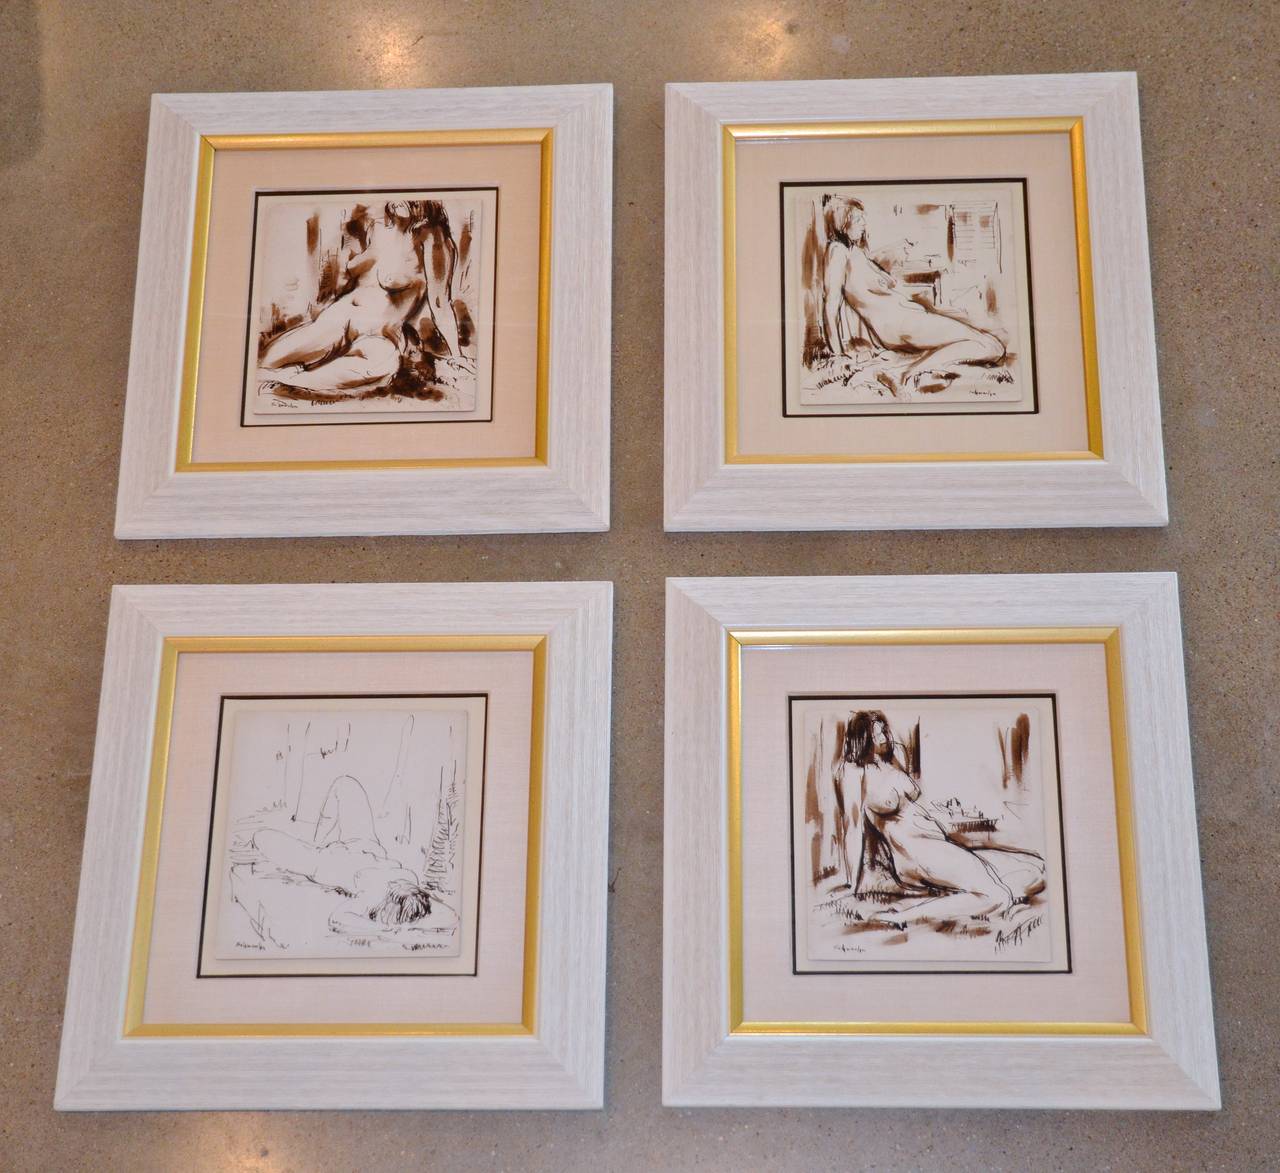 One drawing of a series of 4 by Geroge Schwacha Jr. (American 1908-1986). A renowned landscape painter, Schwacha reveals his gifts as a draftsman in these nude studies. He was highly respected by his peers and was president of the American Artists